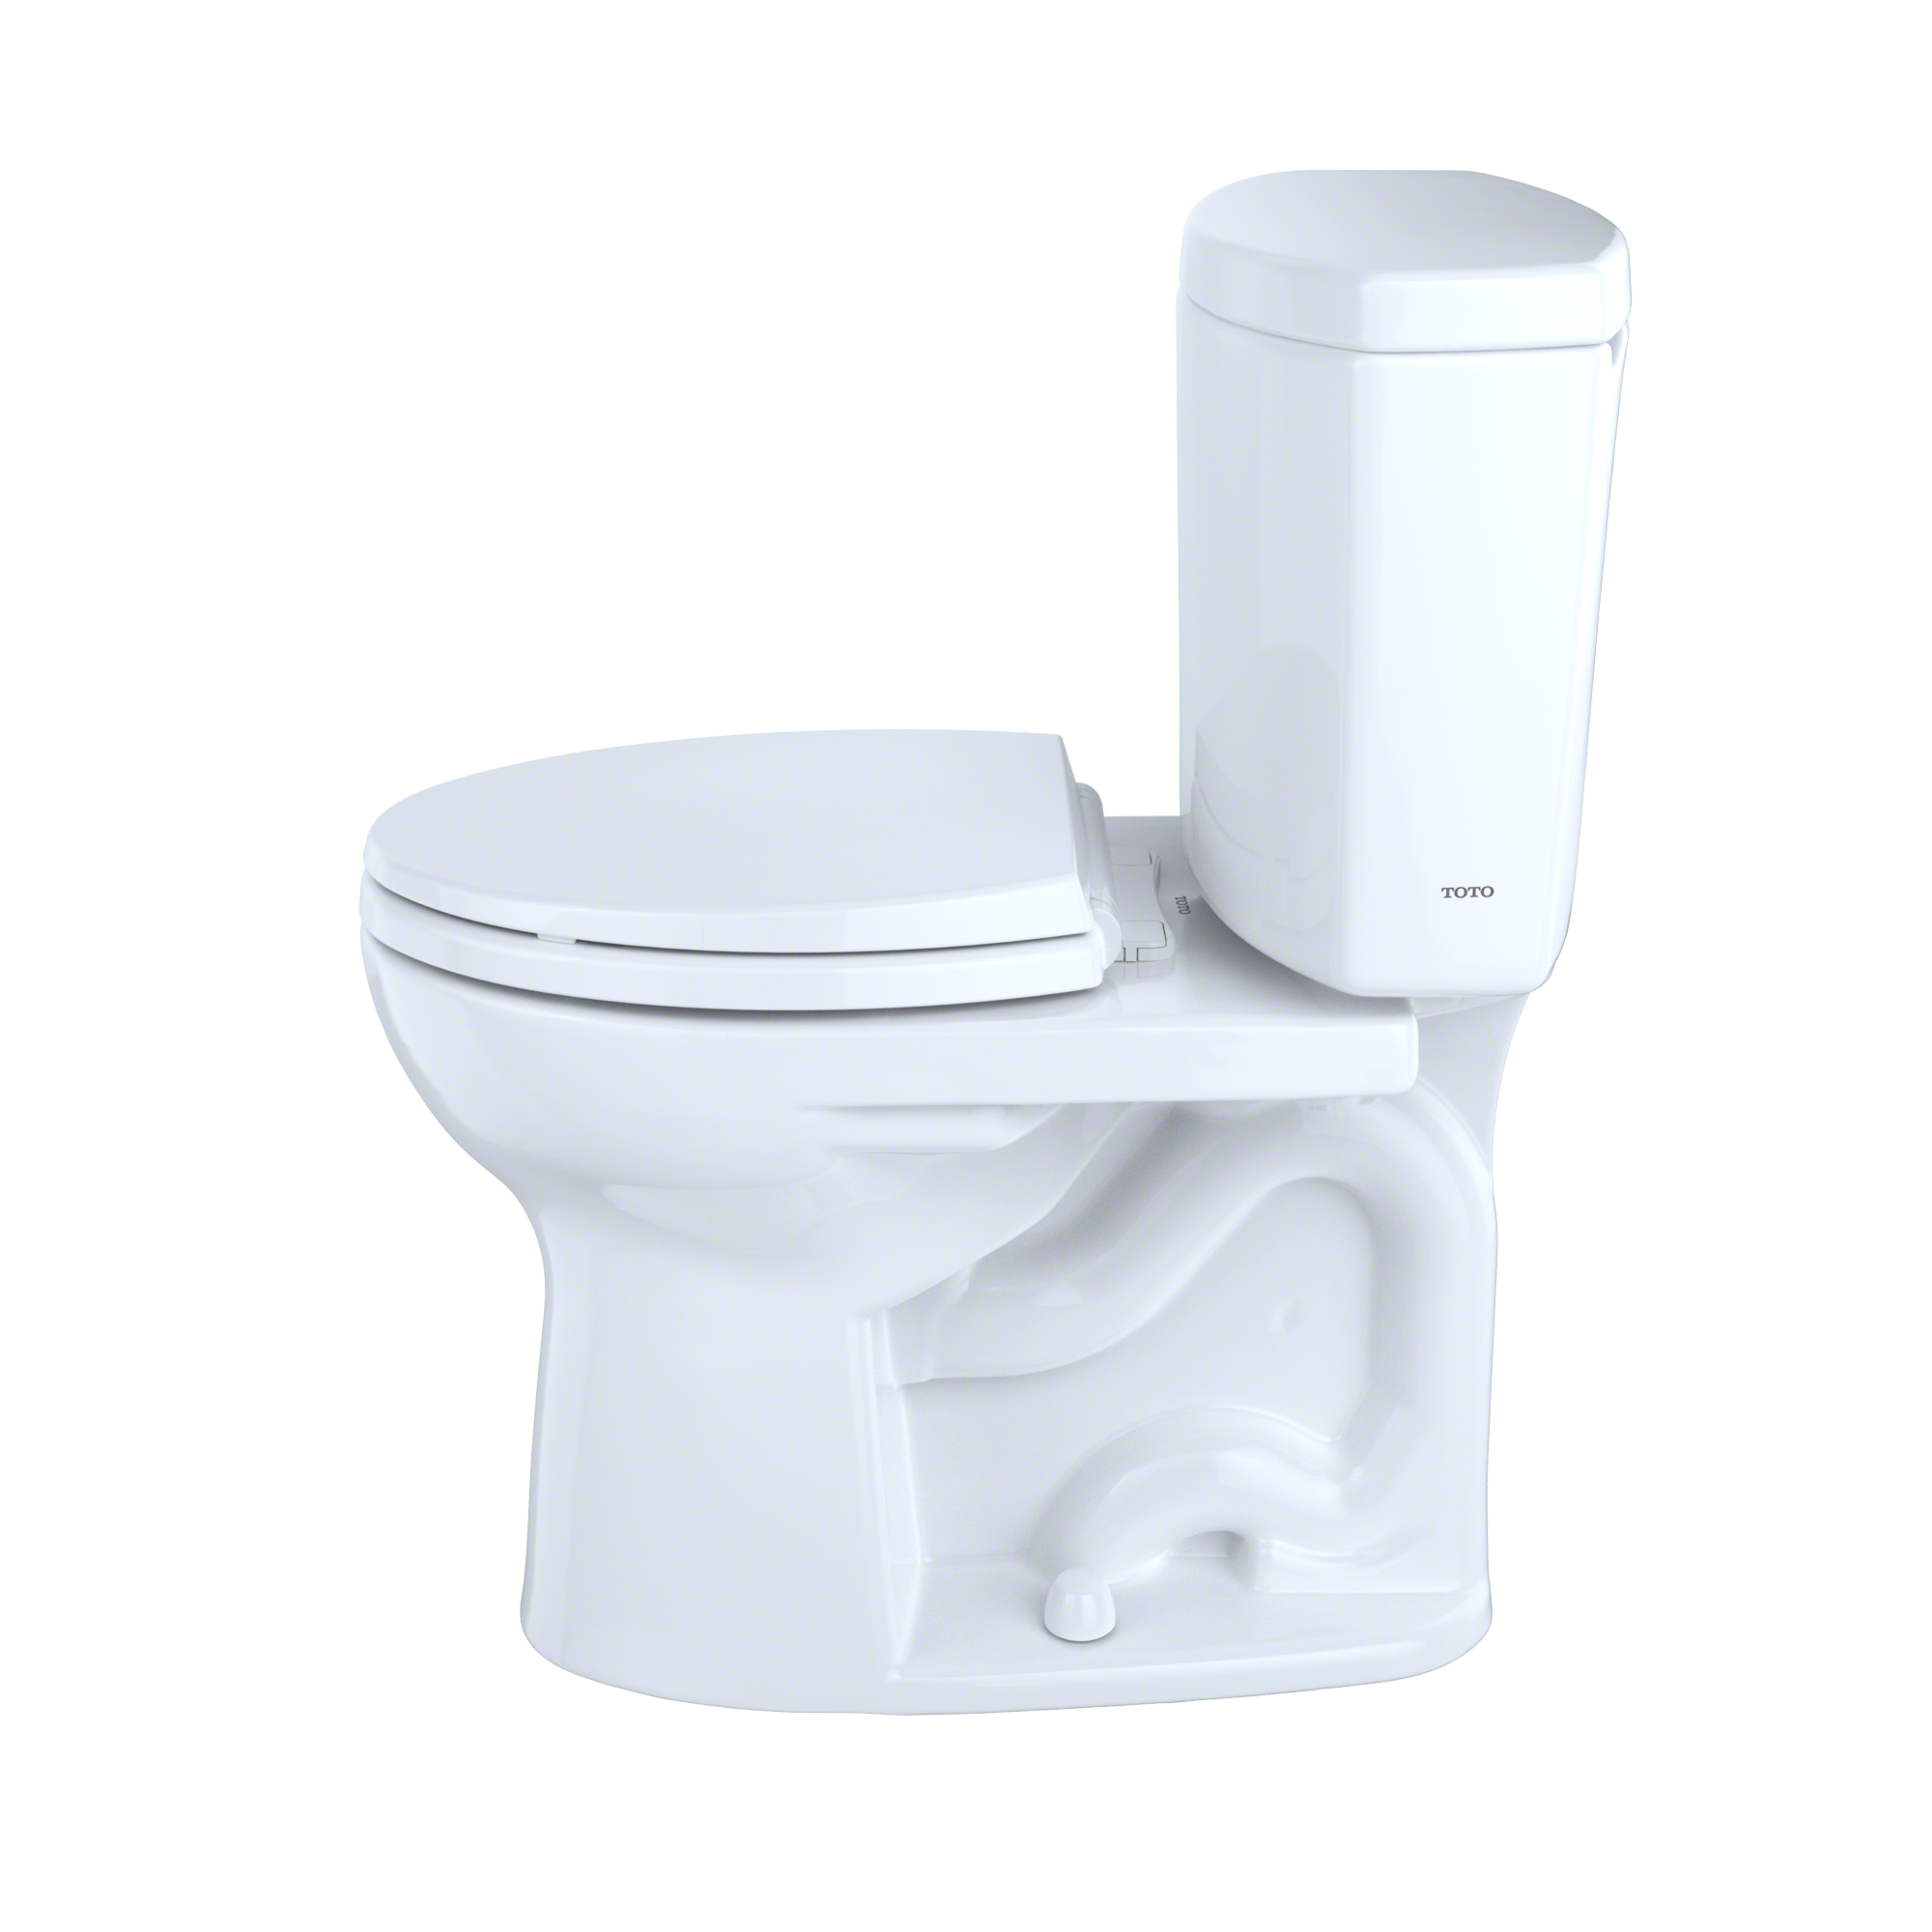 TOTO® Drake® II Two-Piece Round 1.28 GPF Universal Height Toilet with CEFIONTECT, Cotton White - CST453CEFG#01 - image 4 of 5